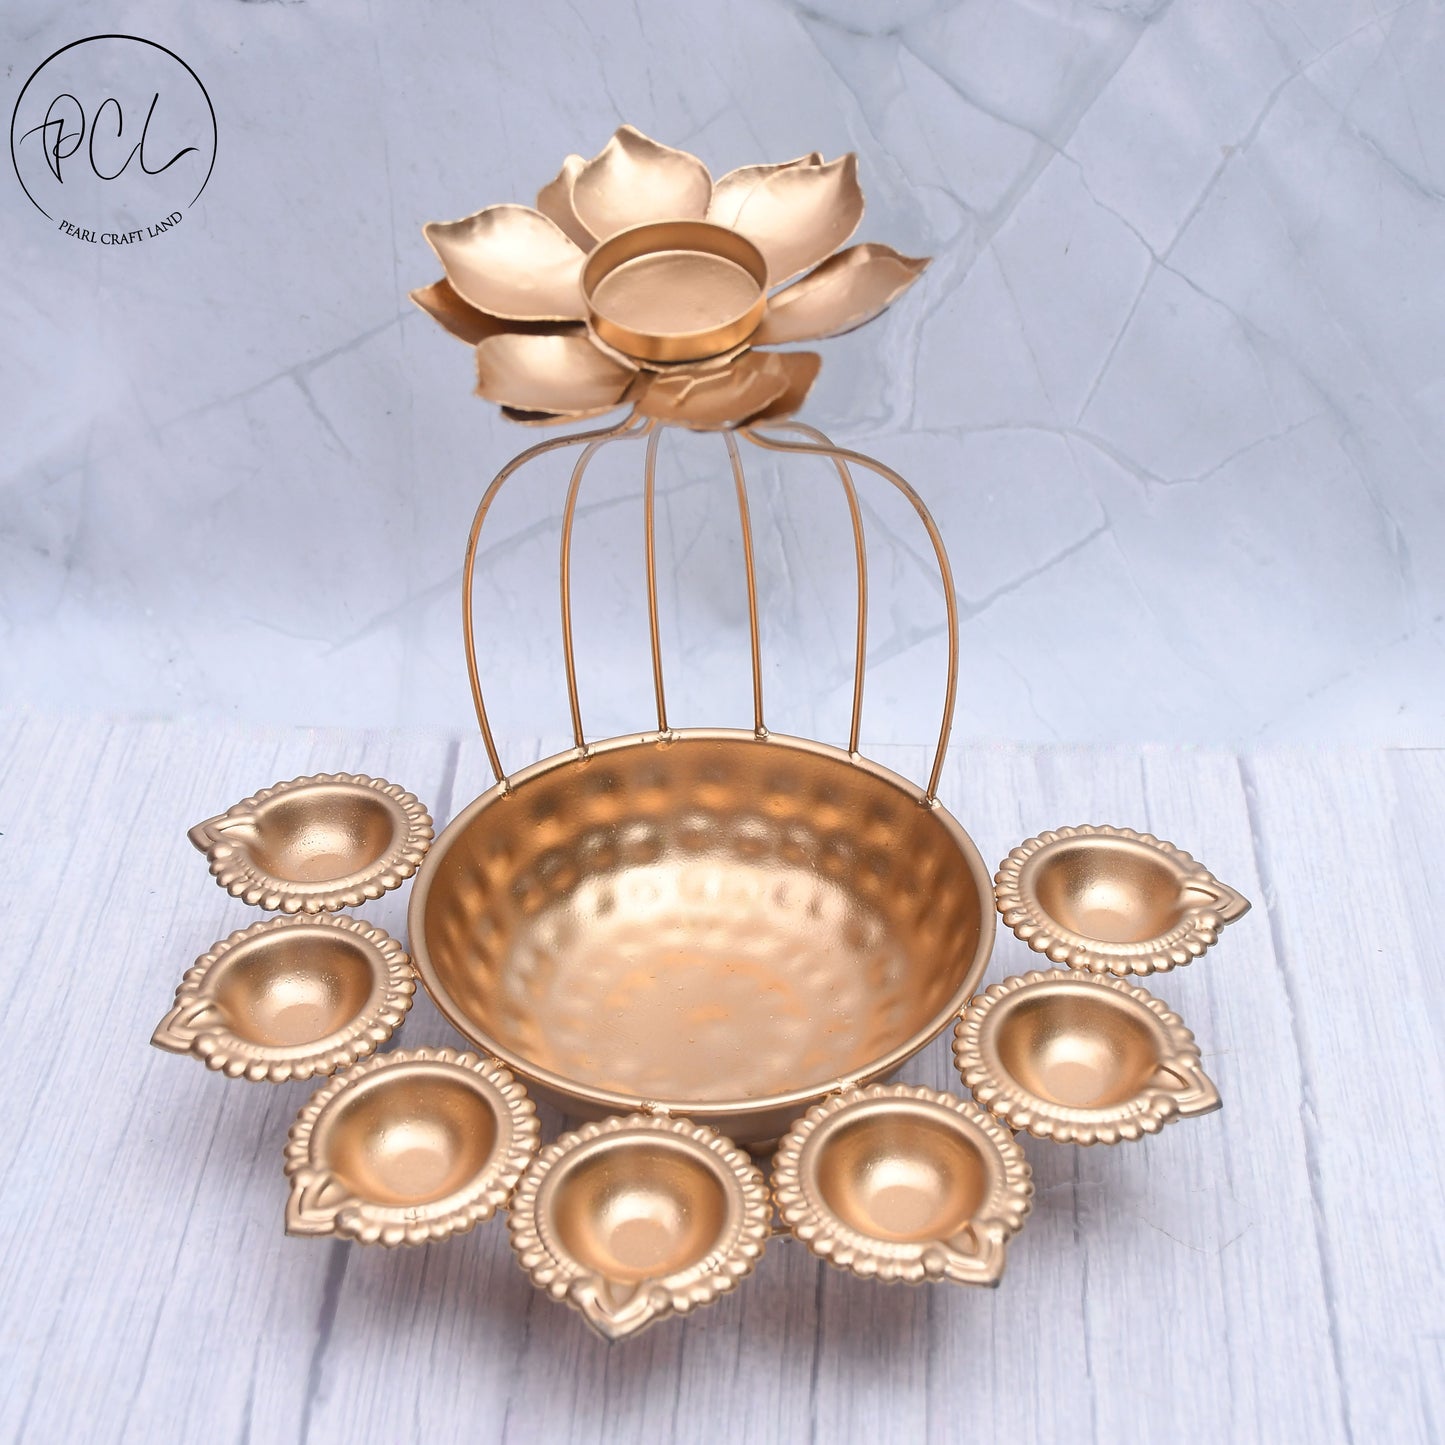 Exclusive Handmade Iron Urli Bowl and Metal Diya Set in Lotus Shape with Gold Powder Coating for Home Decor